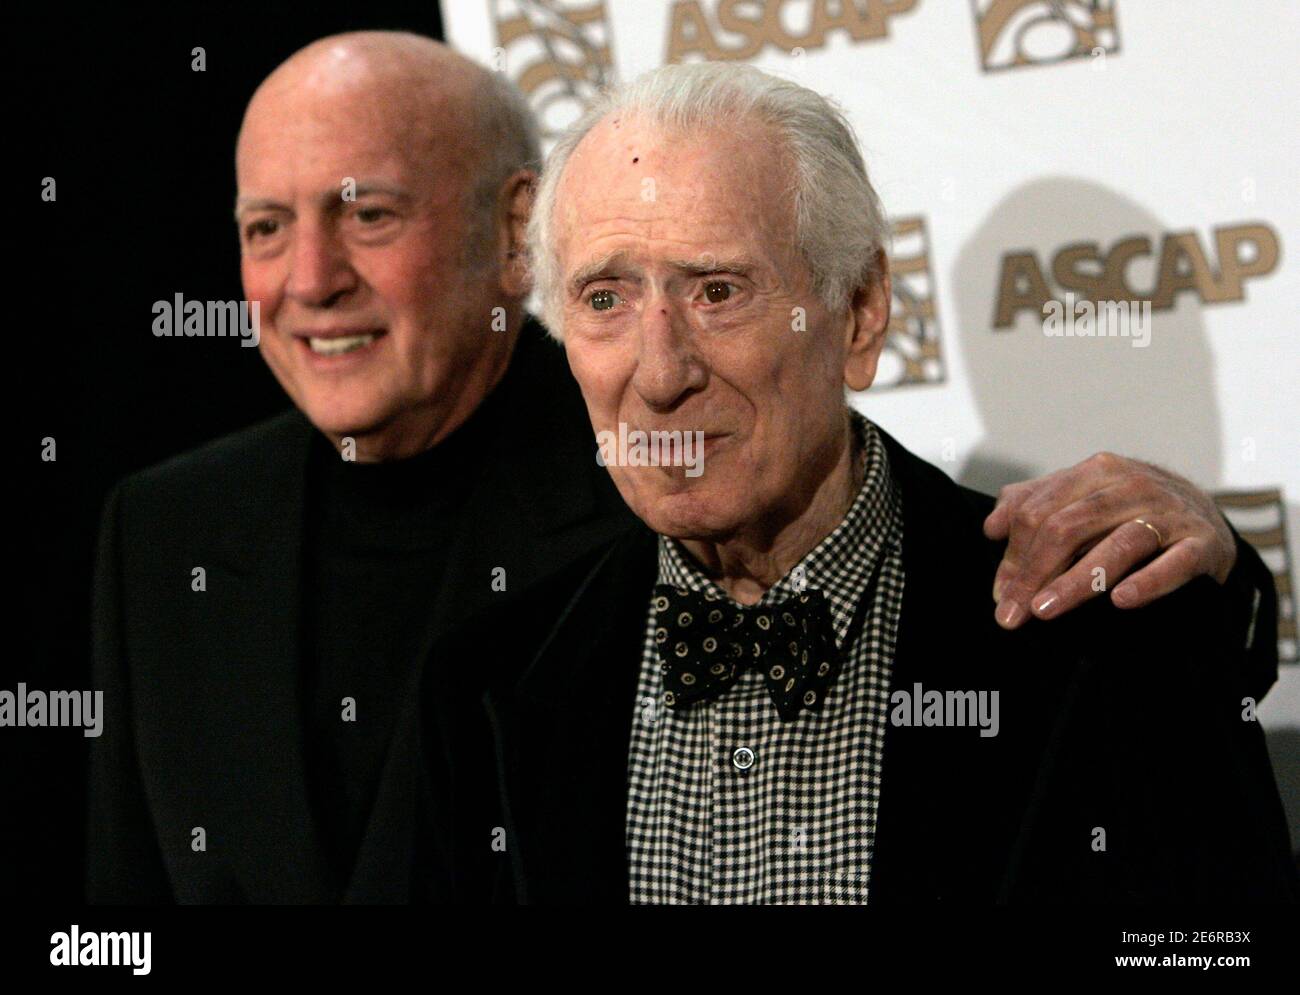 Song writers Mike Stoller (L) and Jerry Leiber arrive at the 25th Annual ASCAP Pop Music Awards at the Kodak theatre in Hollywood, California, April 9, 2008. REUTERS/Danny Moloshok (UNITED STATES) Stock Photo